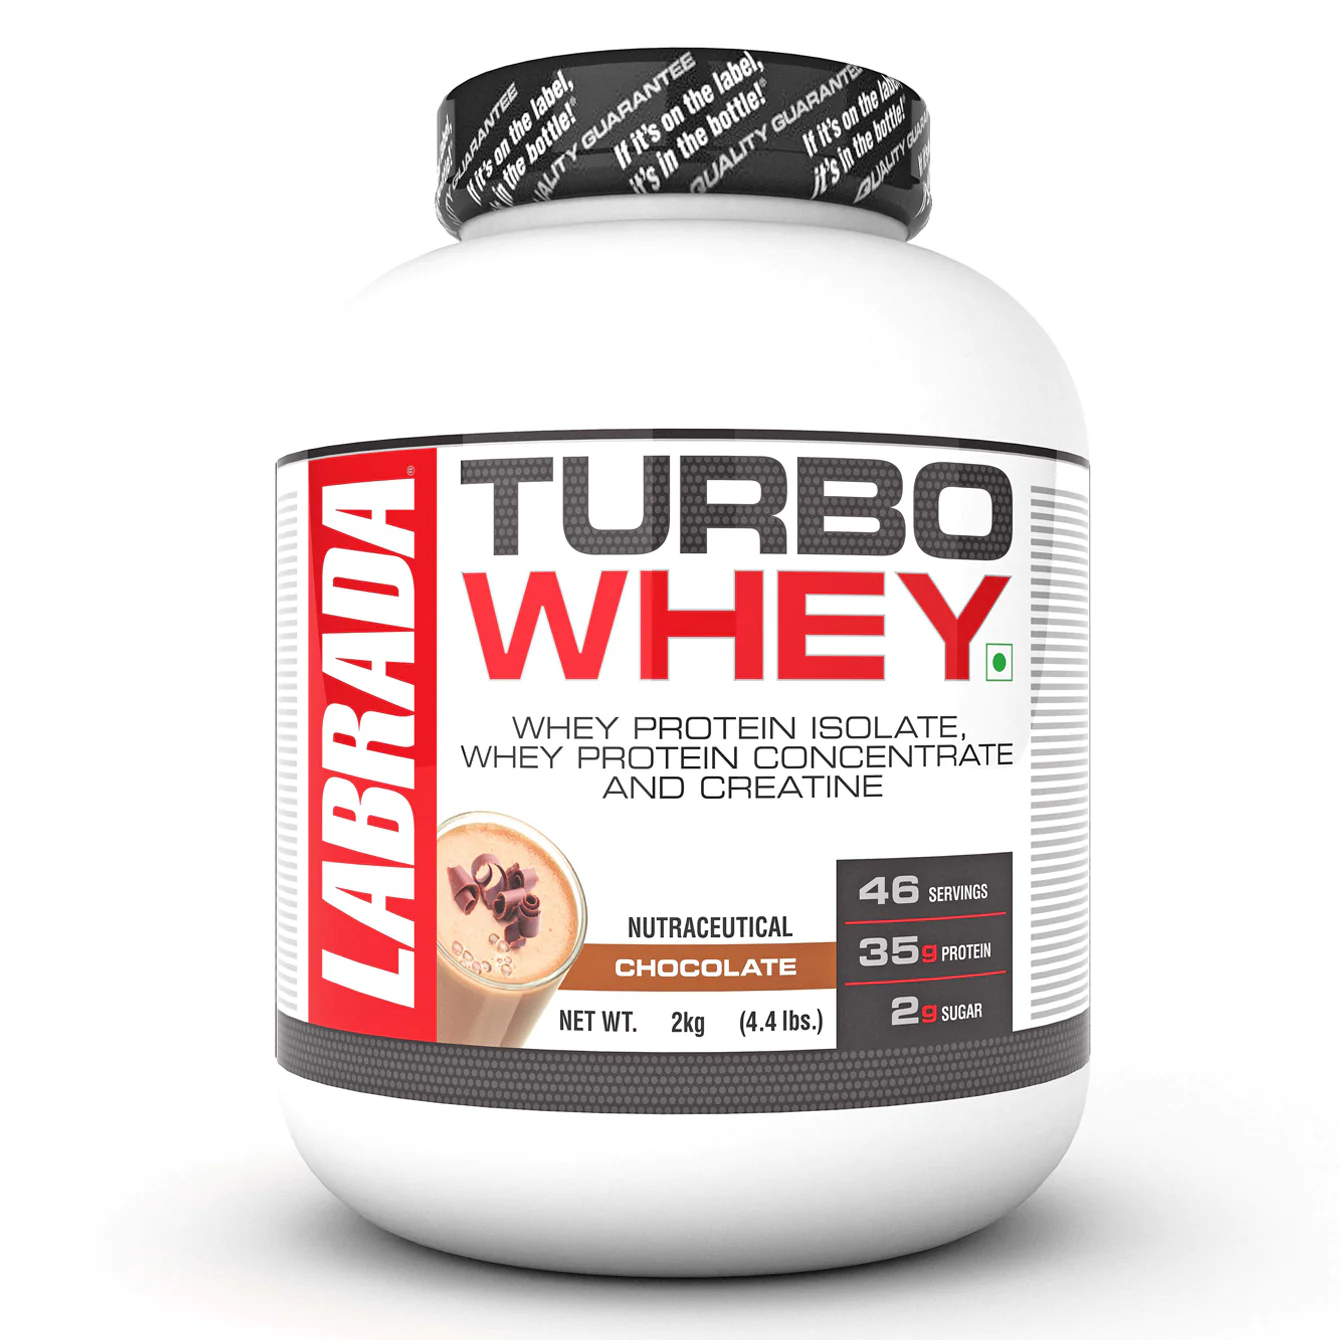 Labrada Nutrition TURBO WHEY – ISOLATE, CONCENTRATE, AND CREATINE